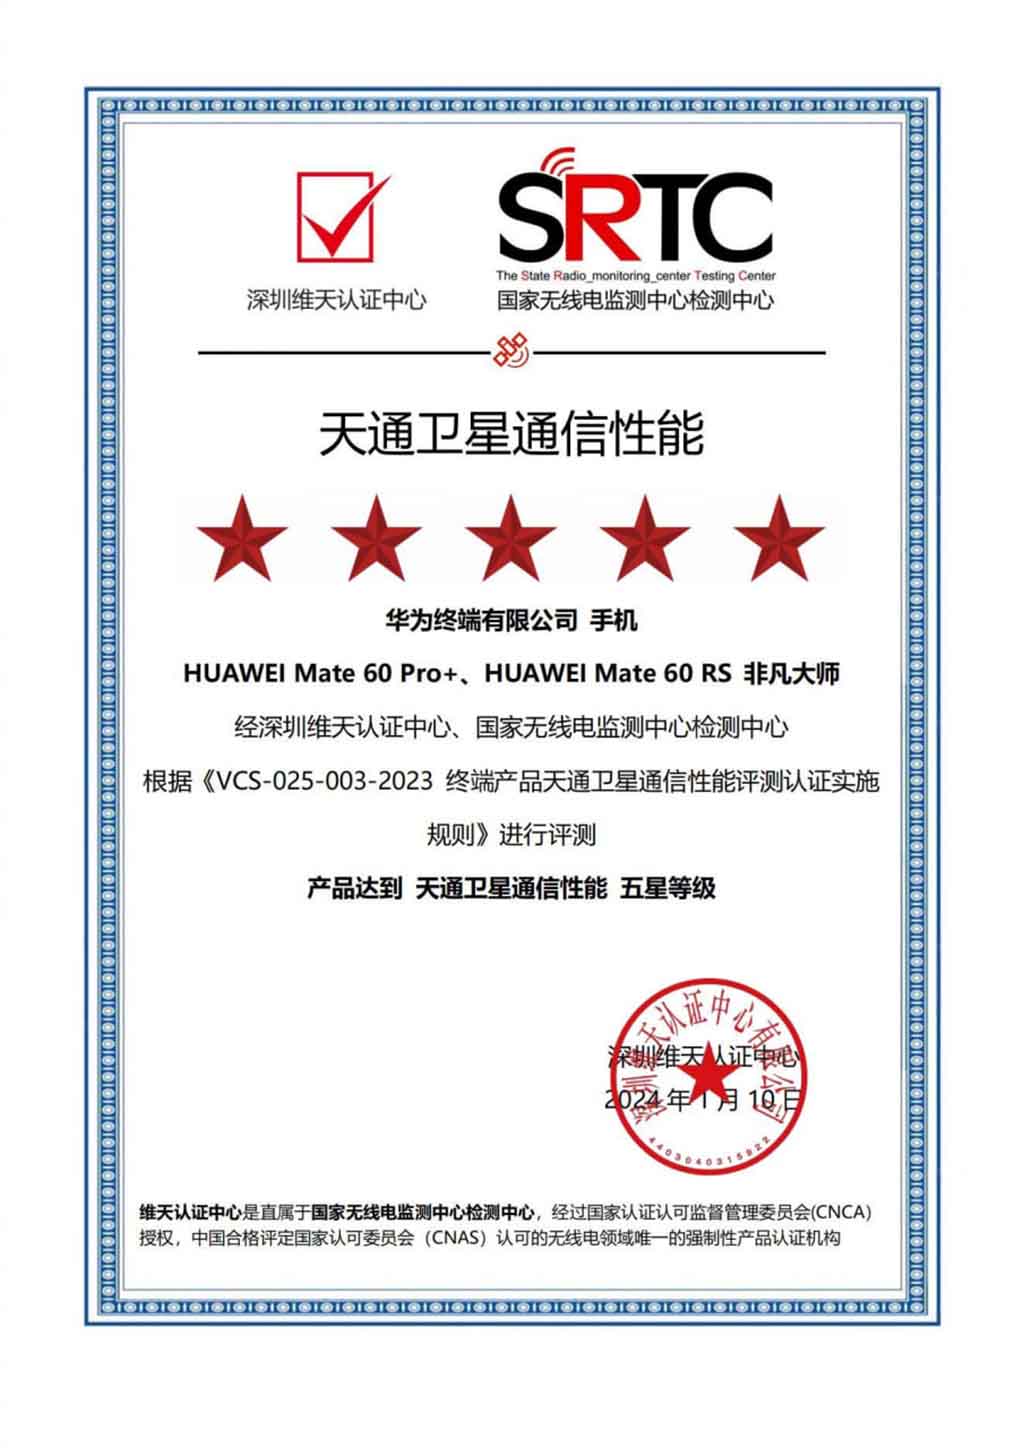 Huawei Mate 60 series double five-star certificate